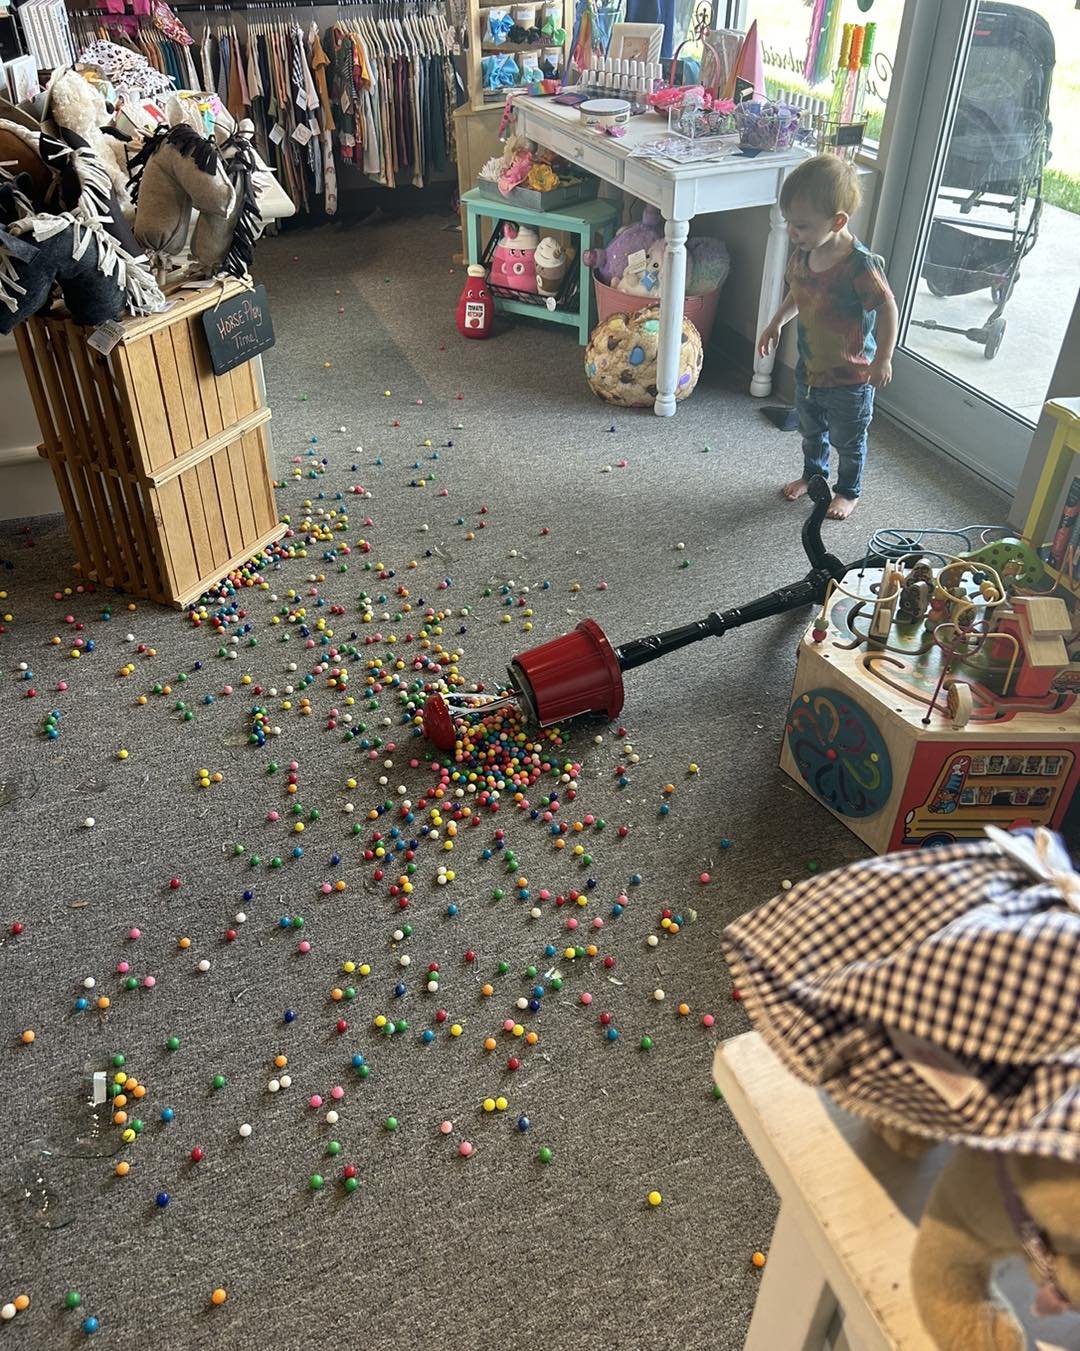 So&hellip;This happened! The challenges of having a toddler at work! The good news is, you no longer have to worry that YOUR kid is going to knock it over!

RIP gumball machine. You will be missed.  #oops #terribletwos #workingmomlife #workingmomstru